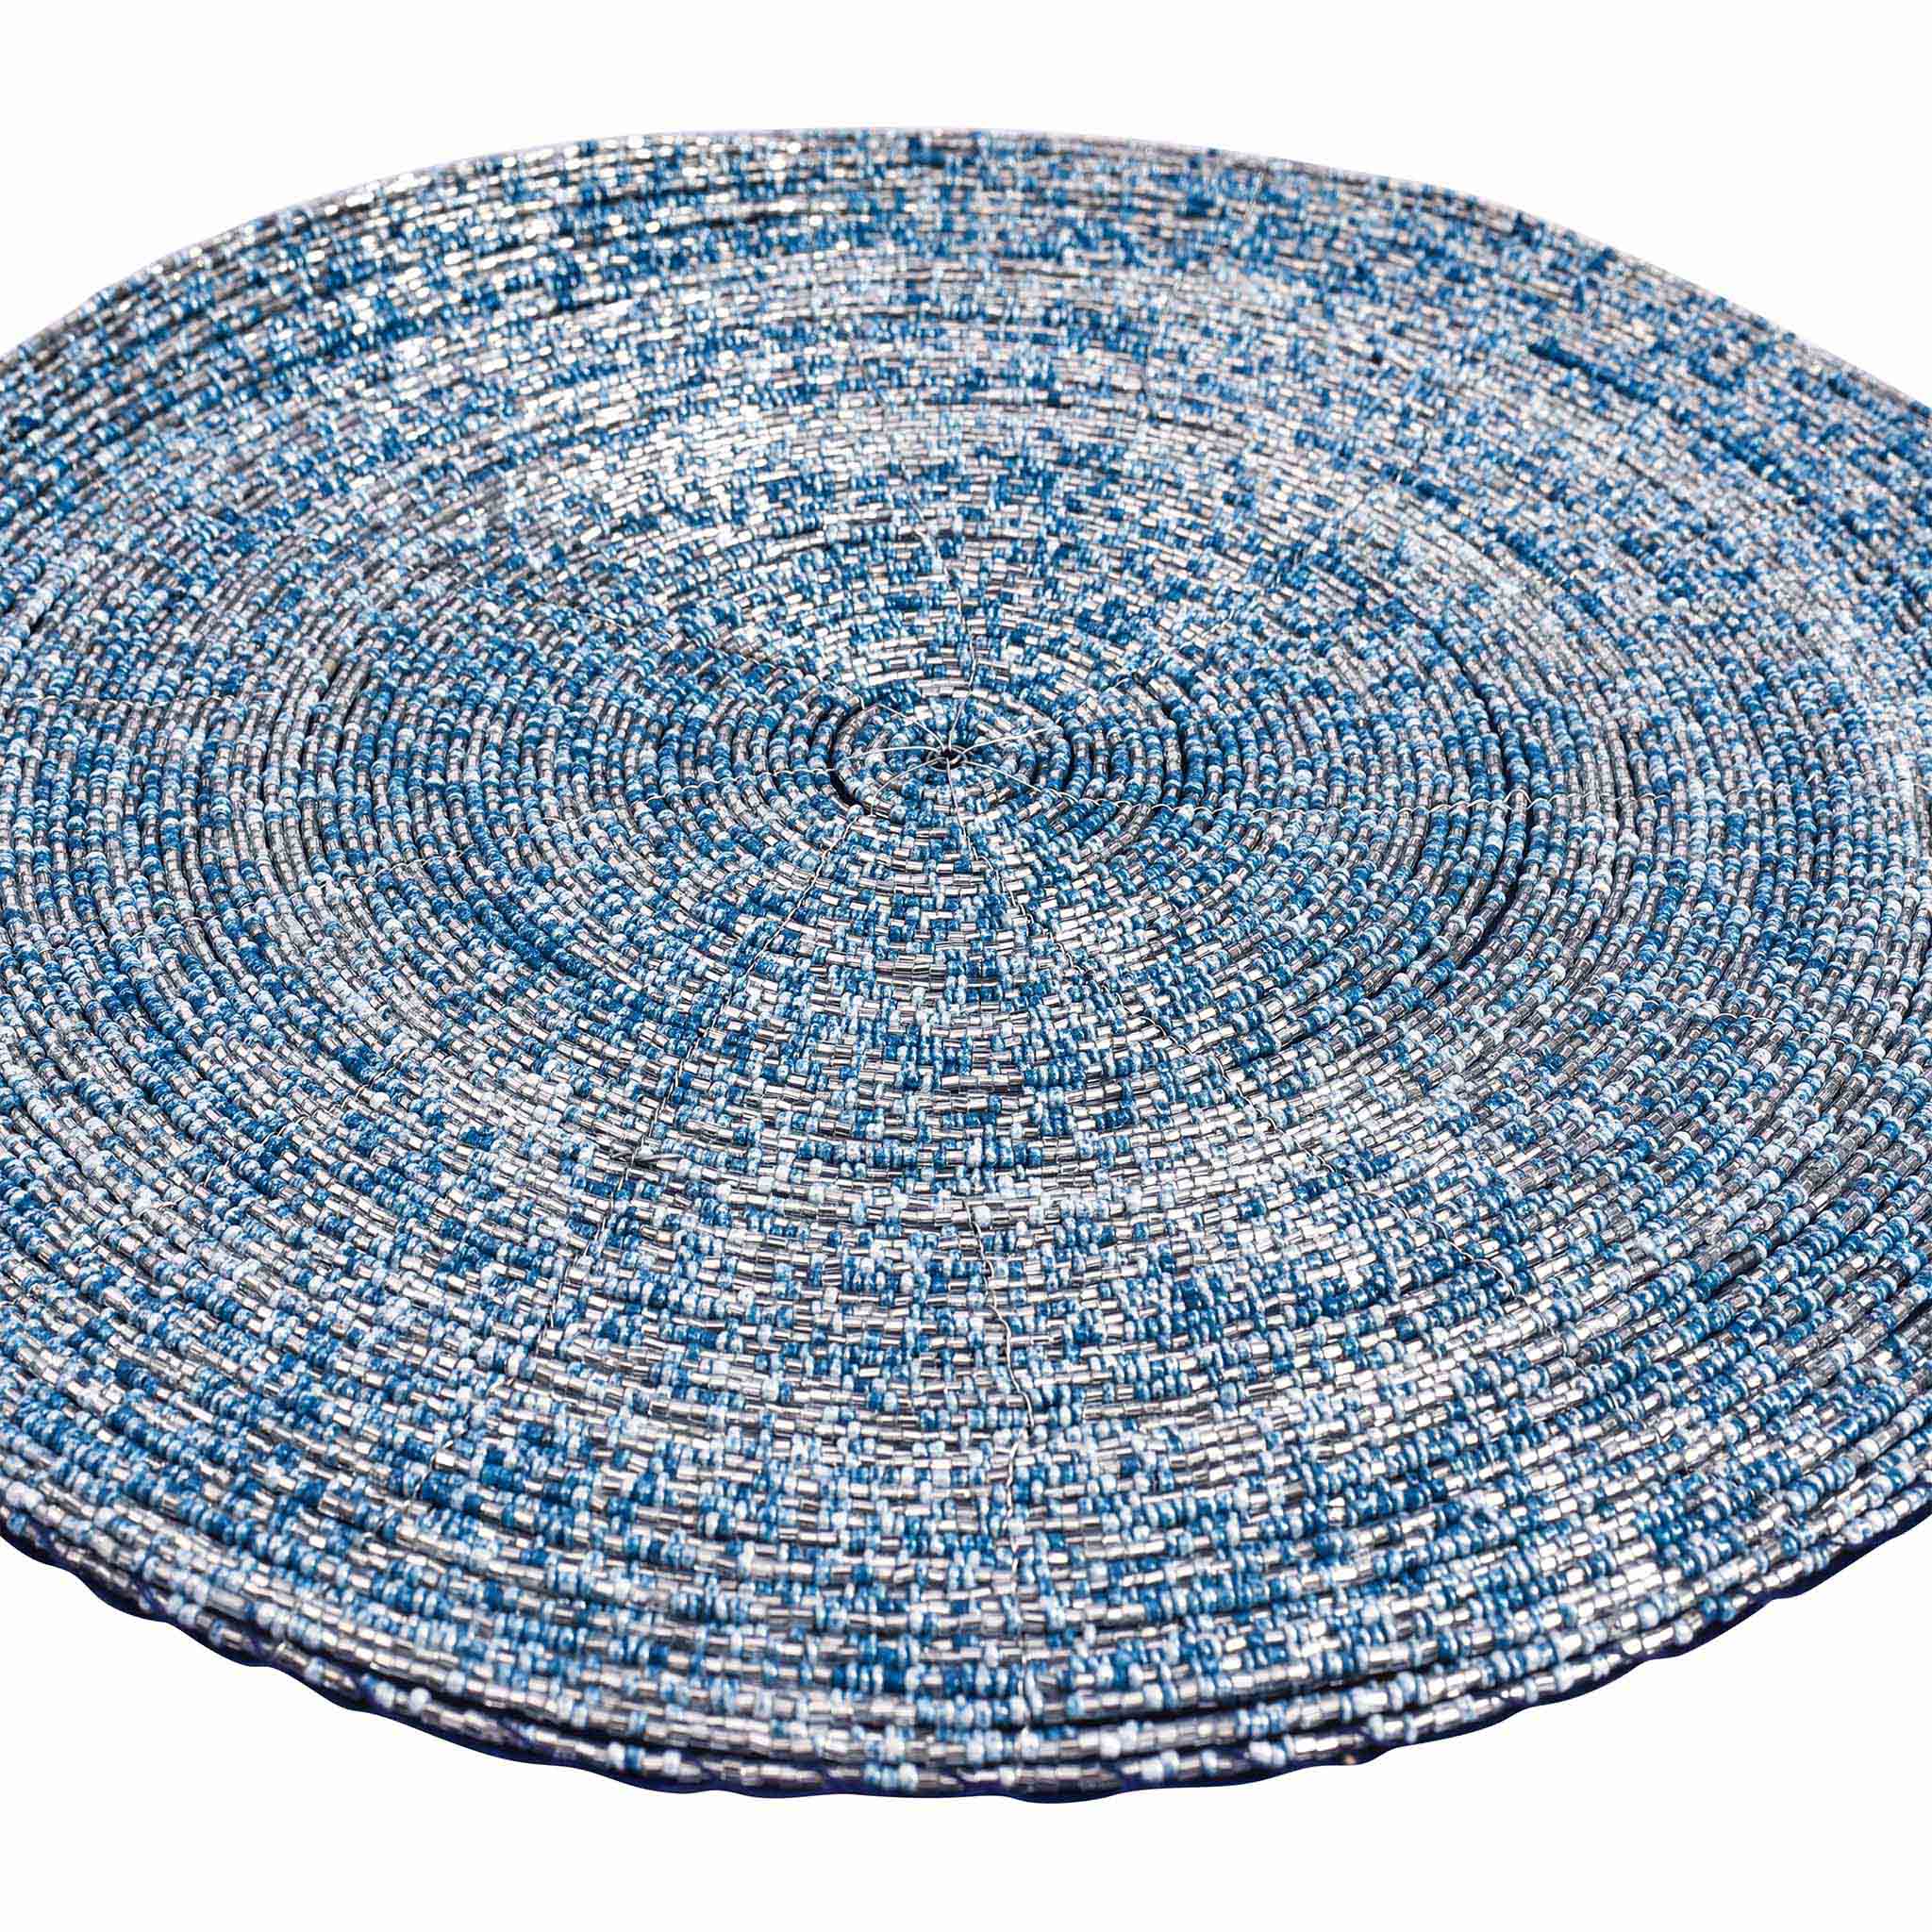 Glass Beaded Placemat in Dark Blue, Set of 4